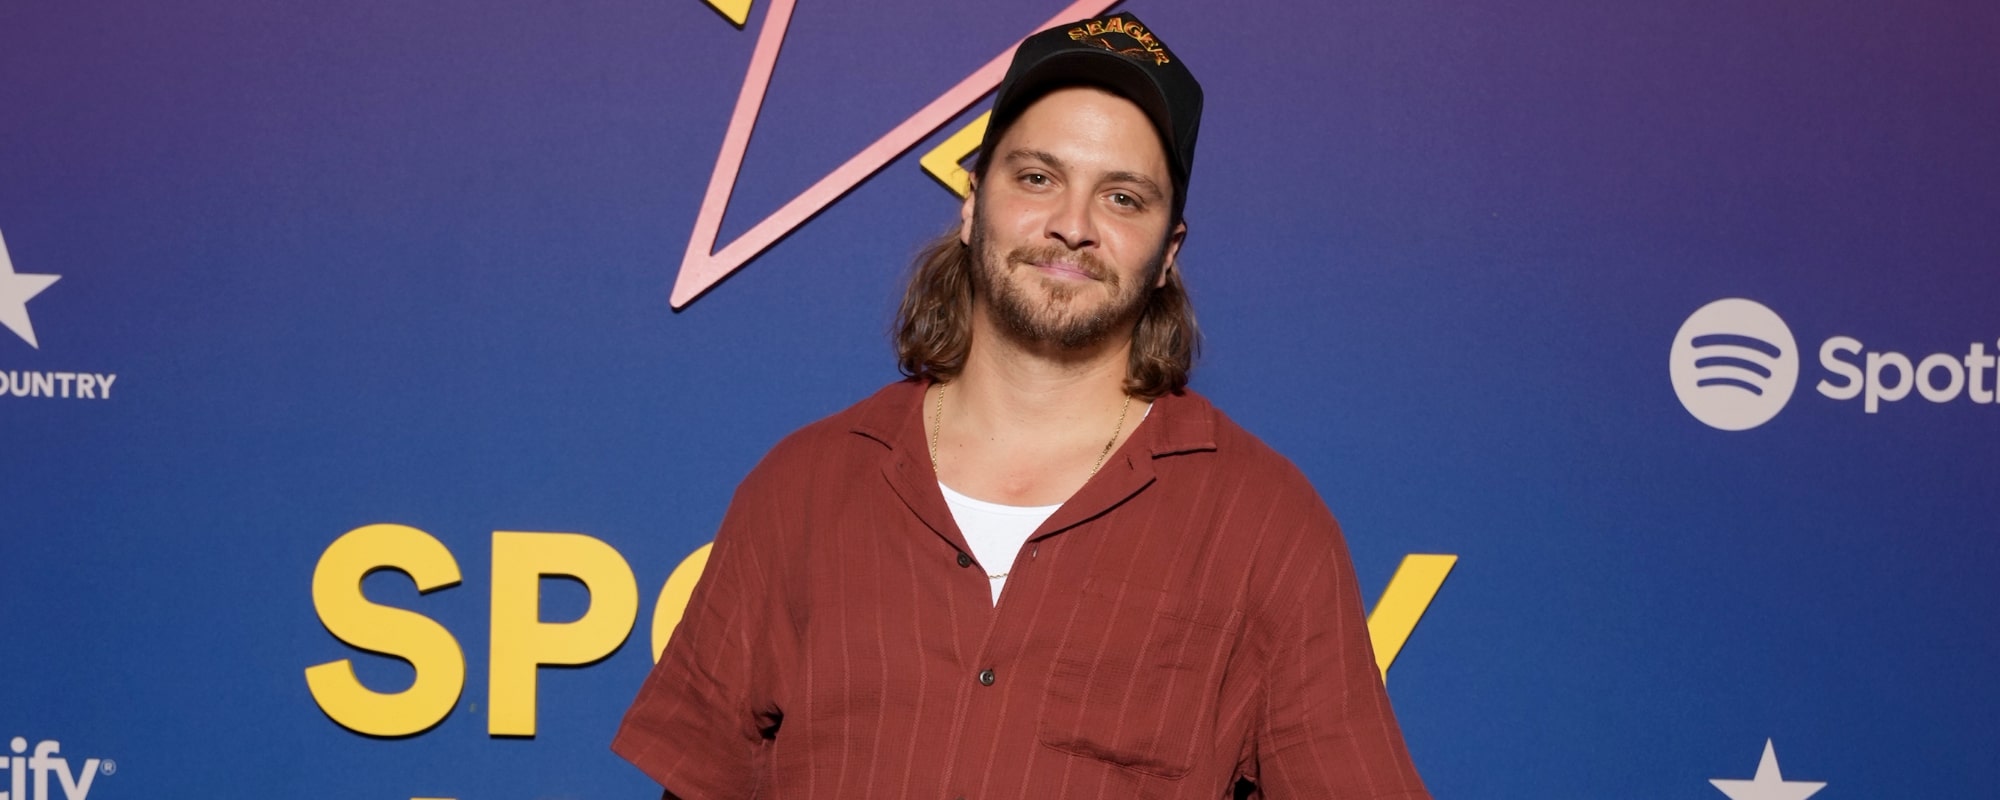 ‘Yellowstone’ Star Luke Grimes Reveals What He Planned to Accomplish with His Debut Album and What Made Him Record It